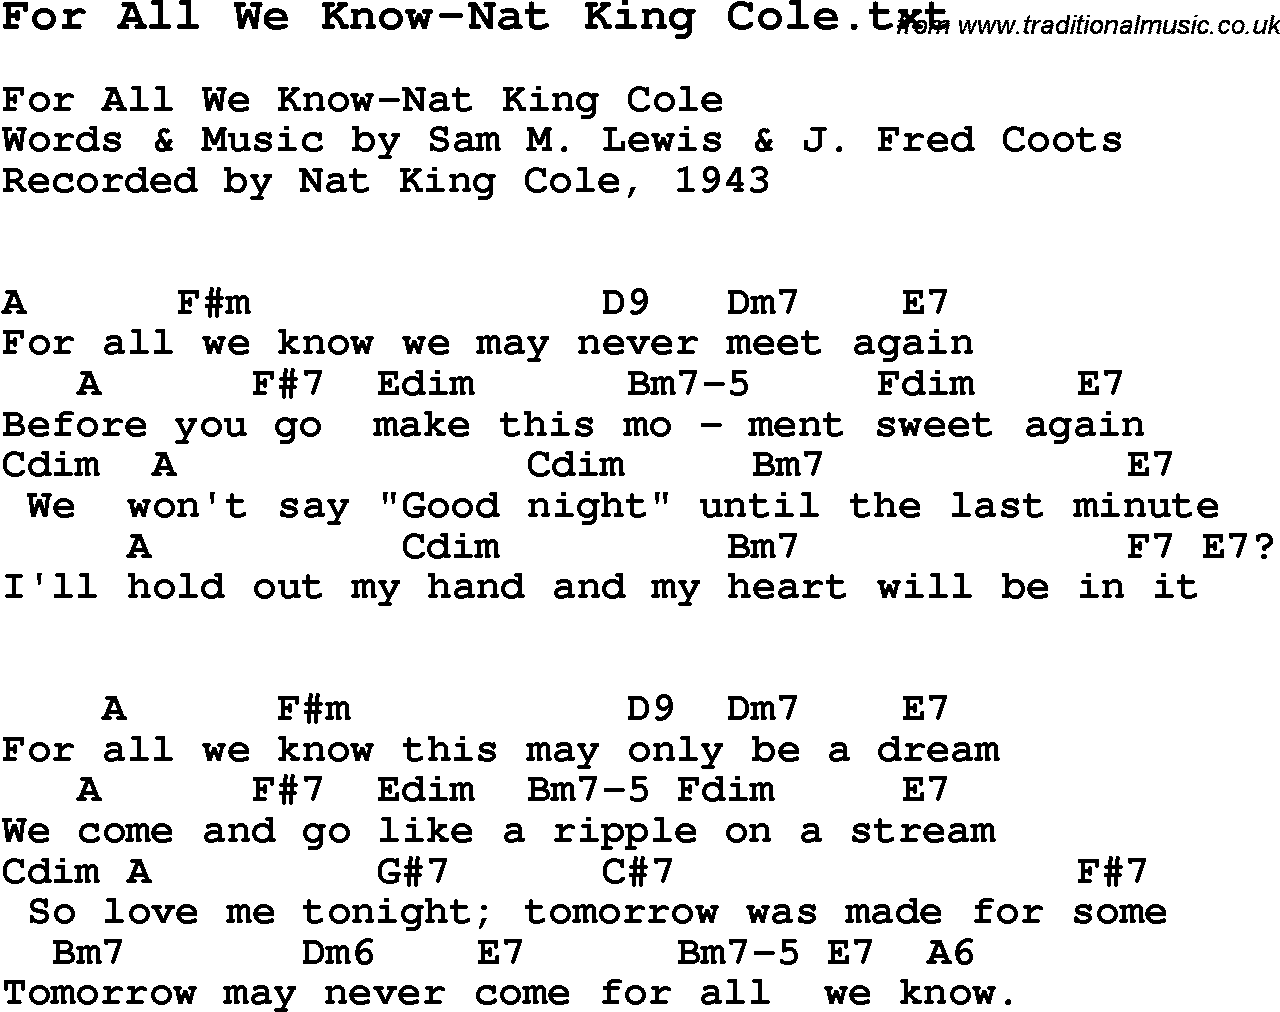 Jazz Song from top bands and vocal artists with chords, tabs and lyrics - For All We Know-Nat King Cole